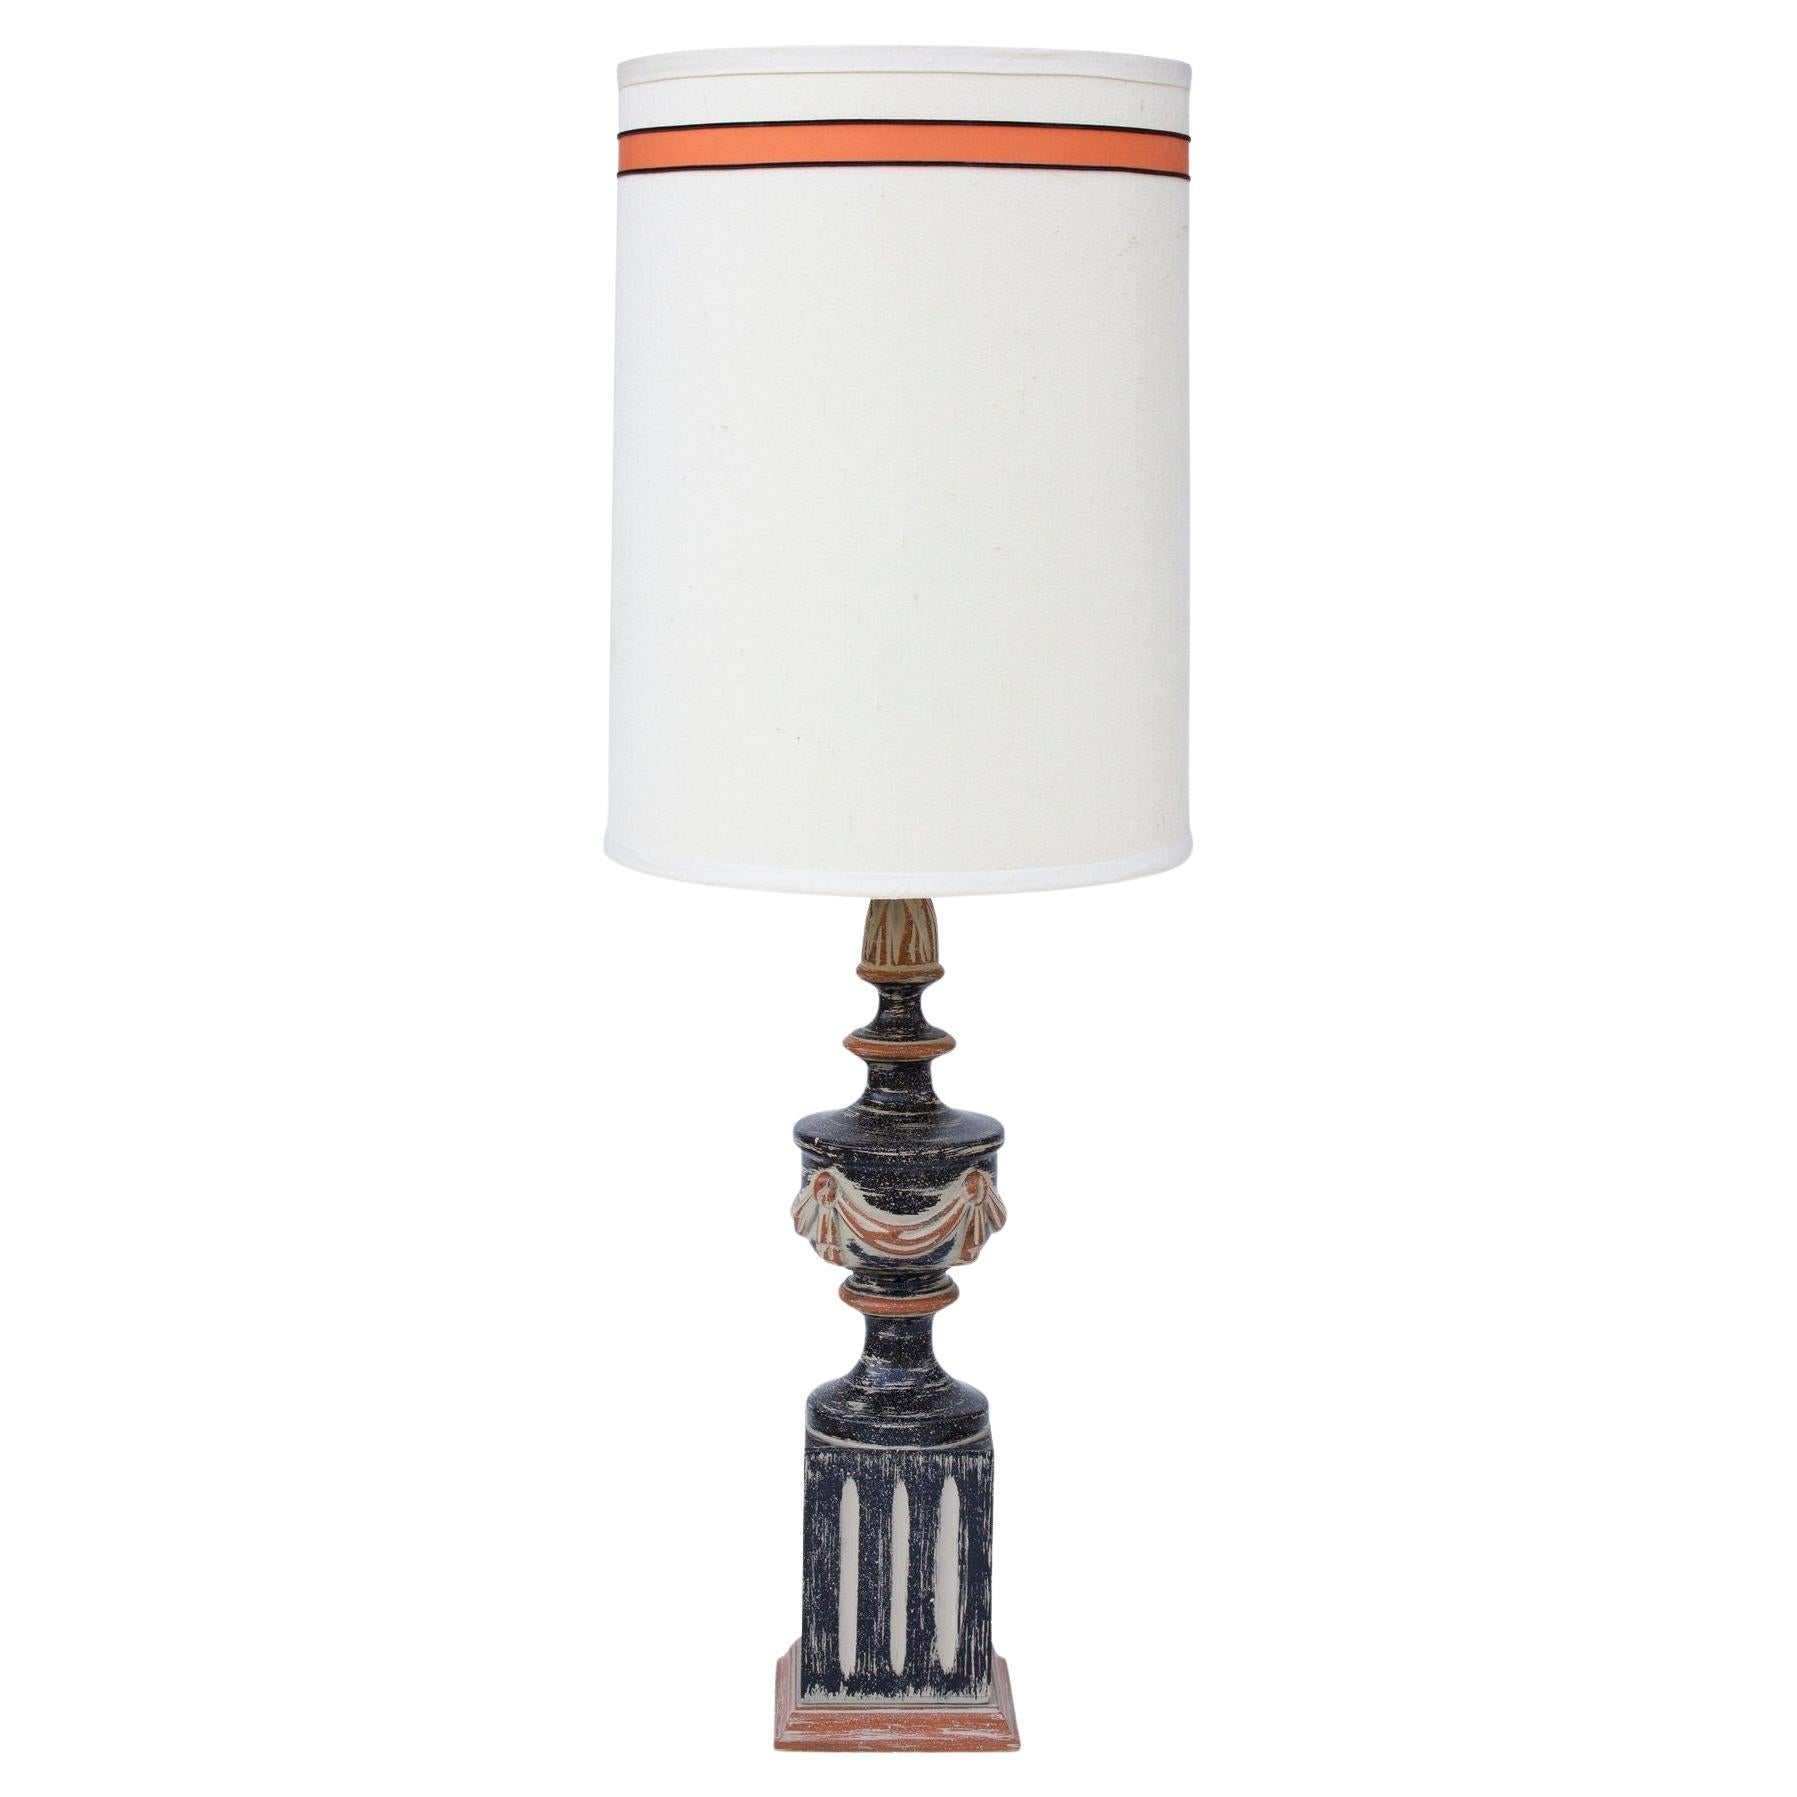 Hand Finished Neoclassical Table Lamp in Black, Taupe, and Burnt Orange For Sale